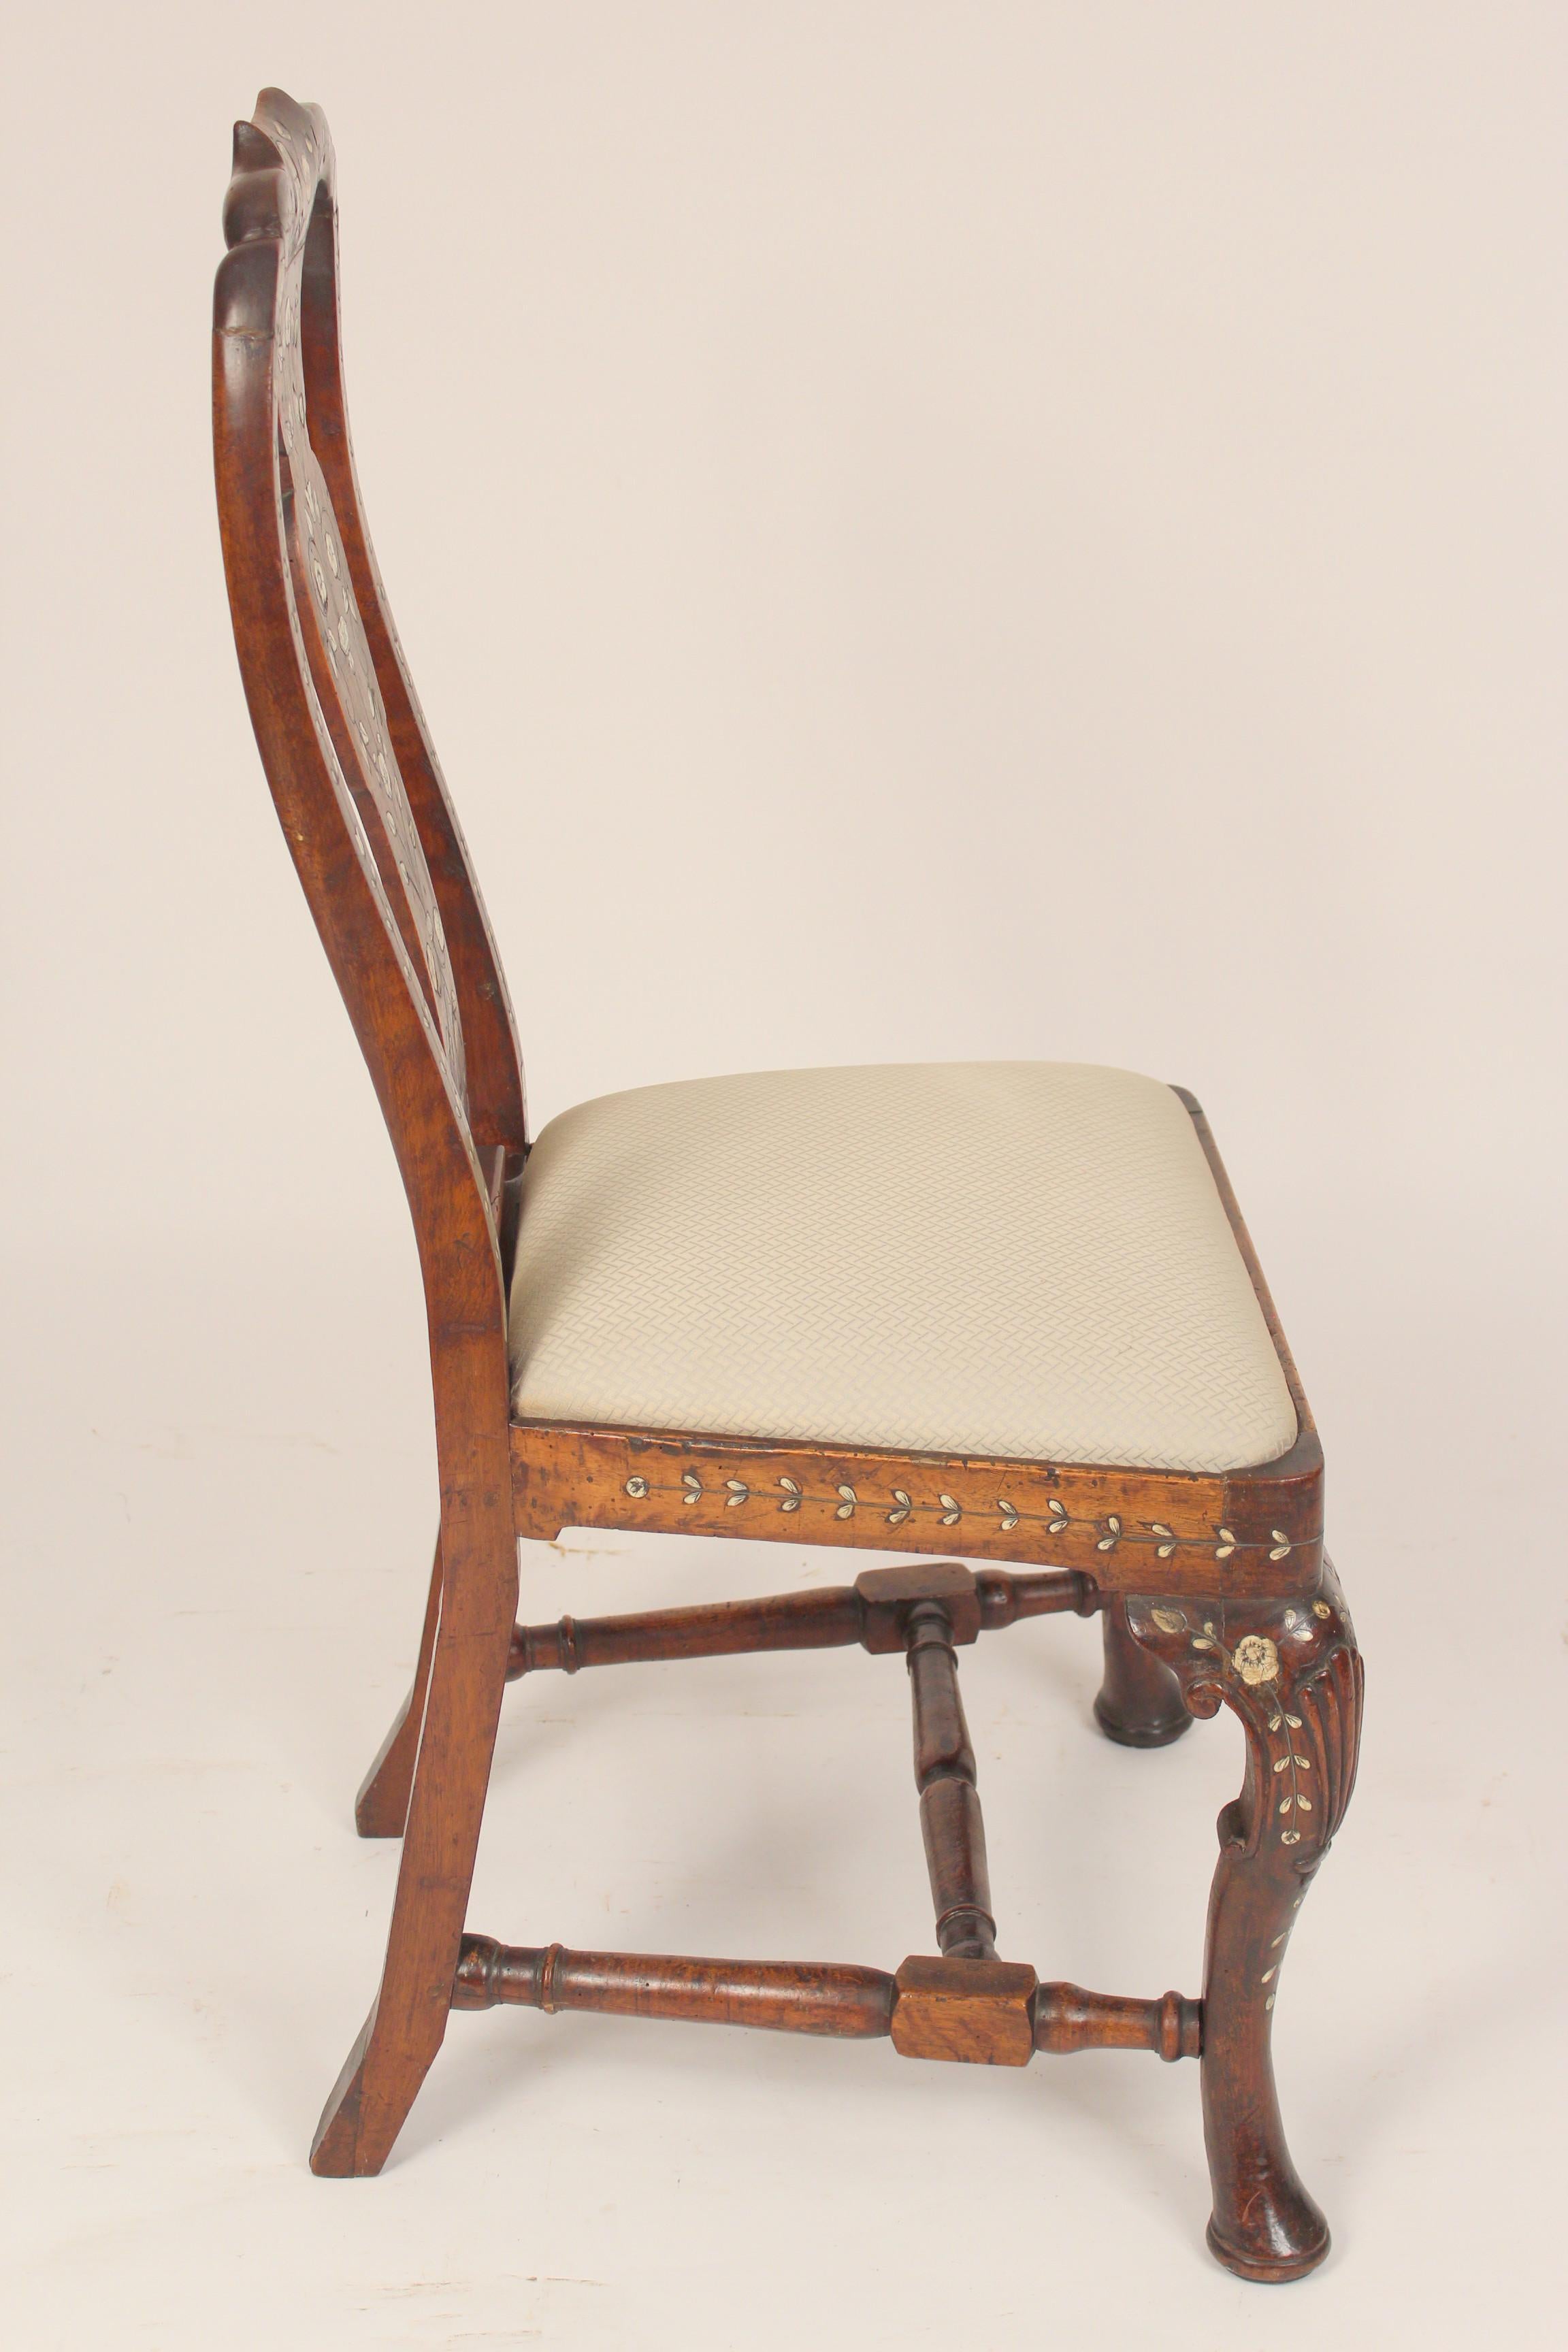 19th Century Antique Indian Export Bone Inlaid Queen Anne Style Side Chair